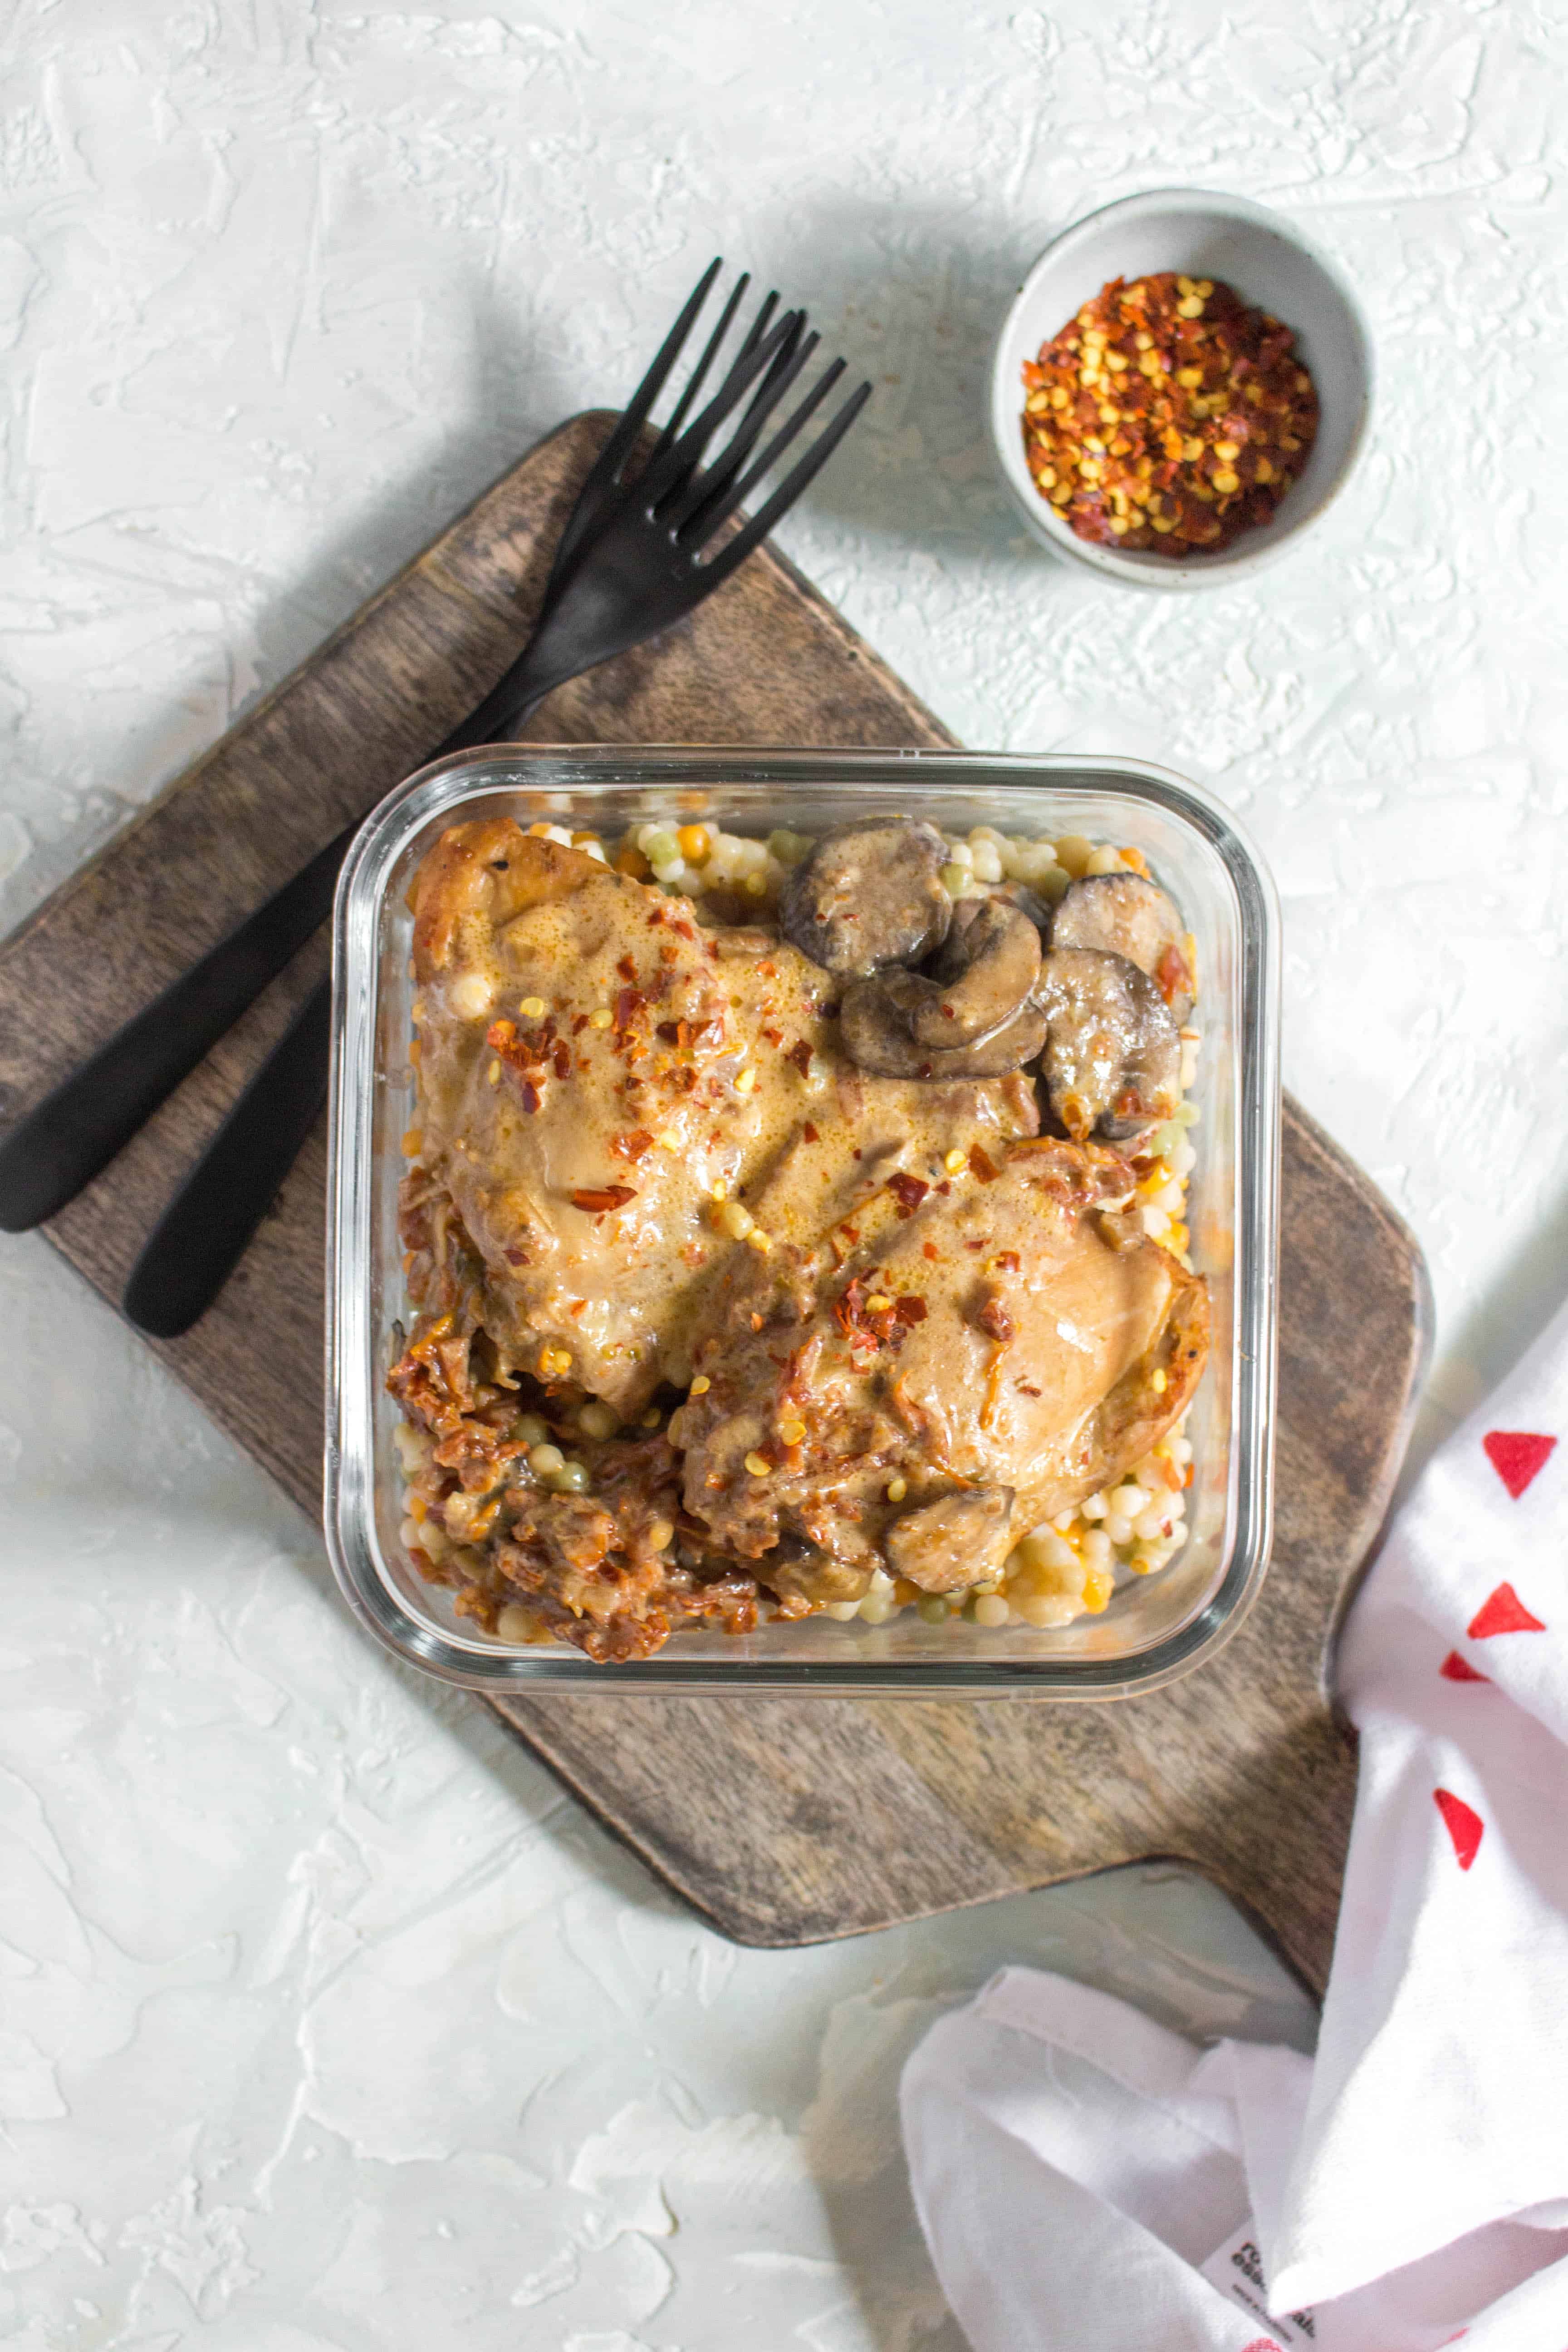 This Instant Pot Chicken with Creamy Sun Dried Tomato Parmesan Sauce takes under 30 minutes to make and is so tender and juicy. A creamy sauce with mushrooms and sun dried tomatoes, this Instant Pot chicken recipe is packed with flavour. Non Instant Pot instructions included.